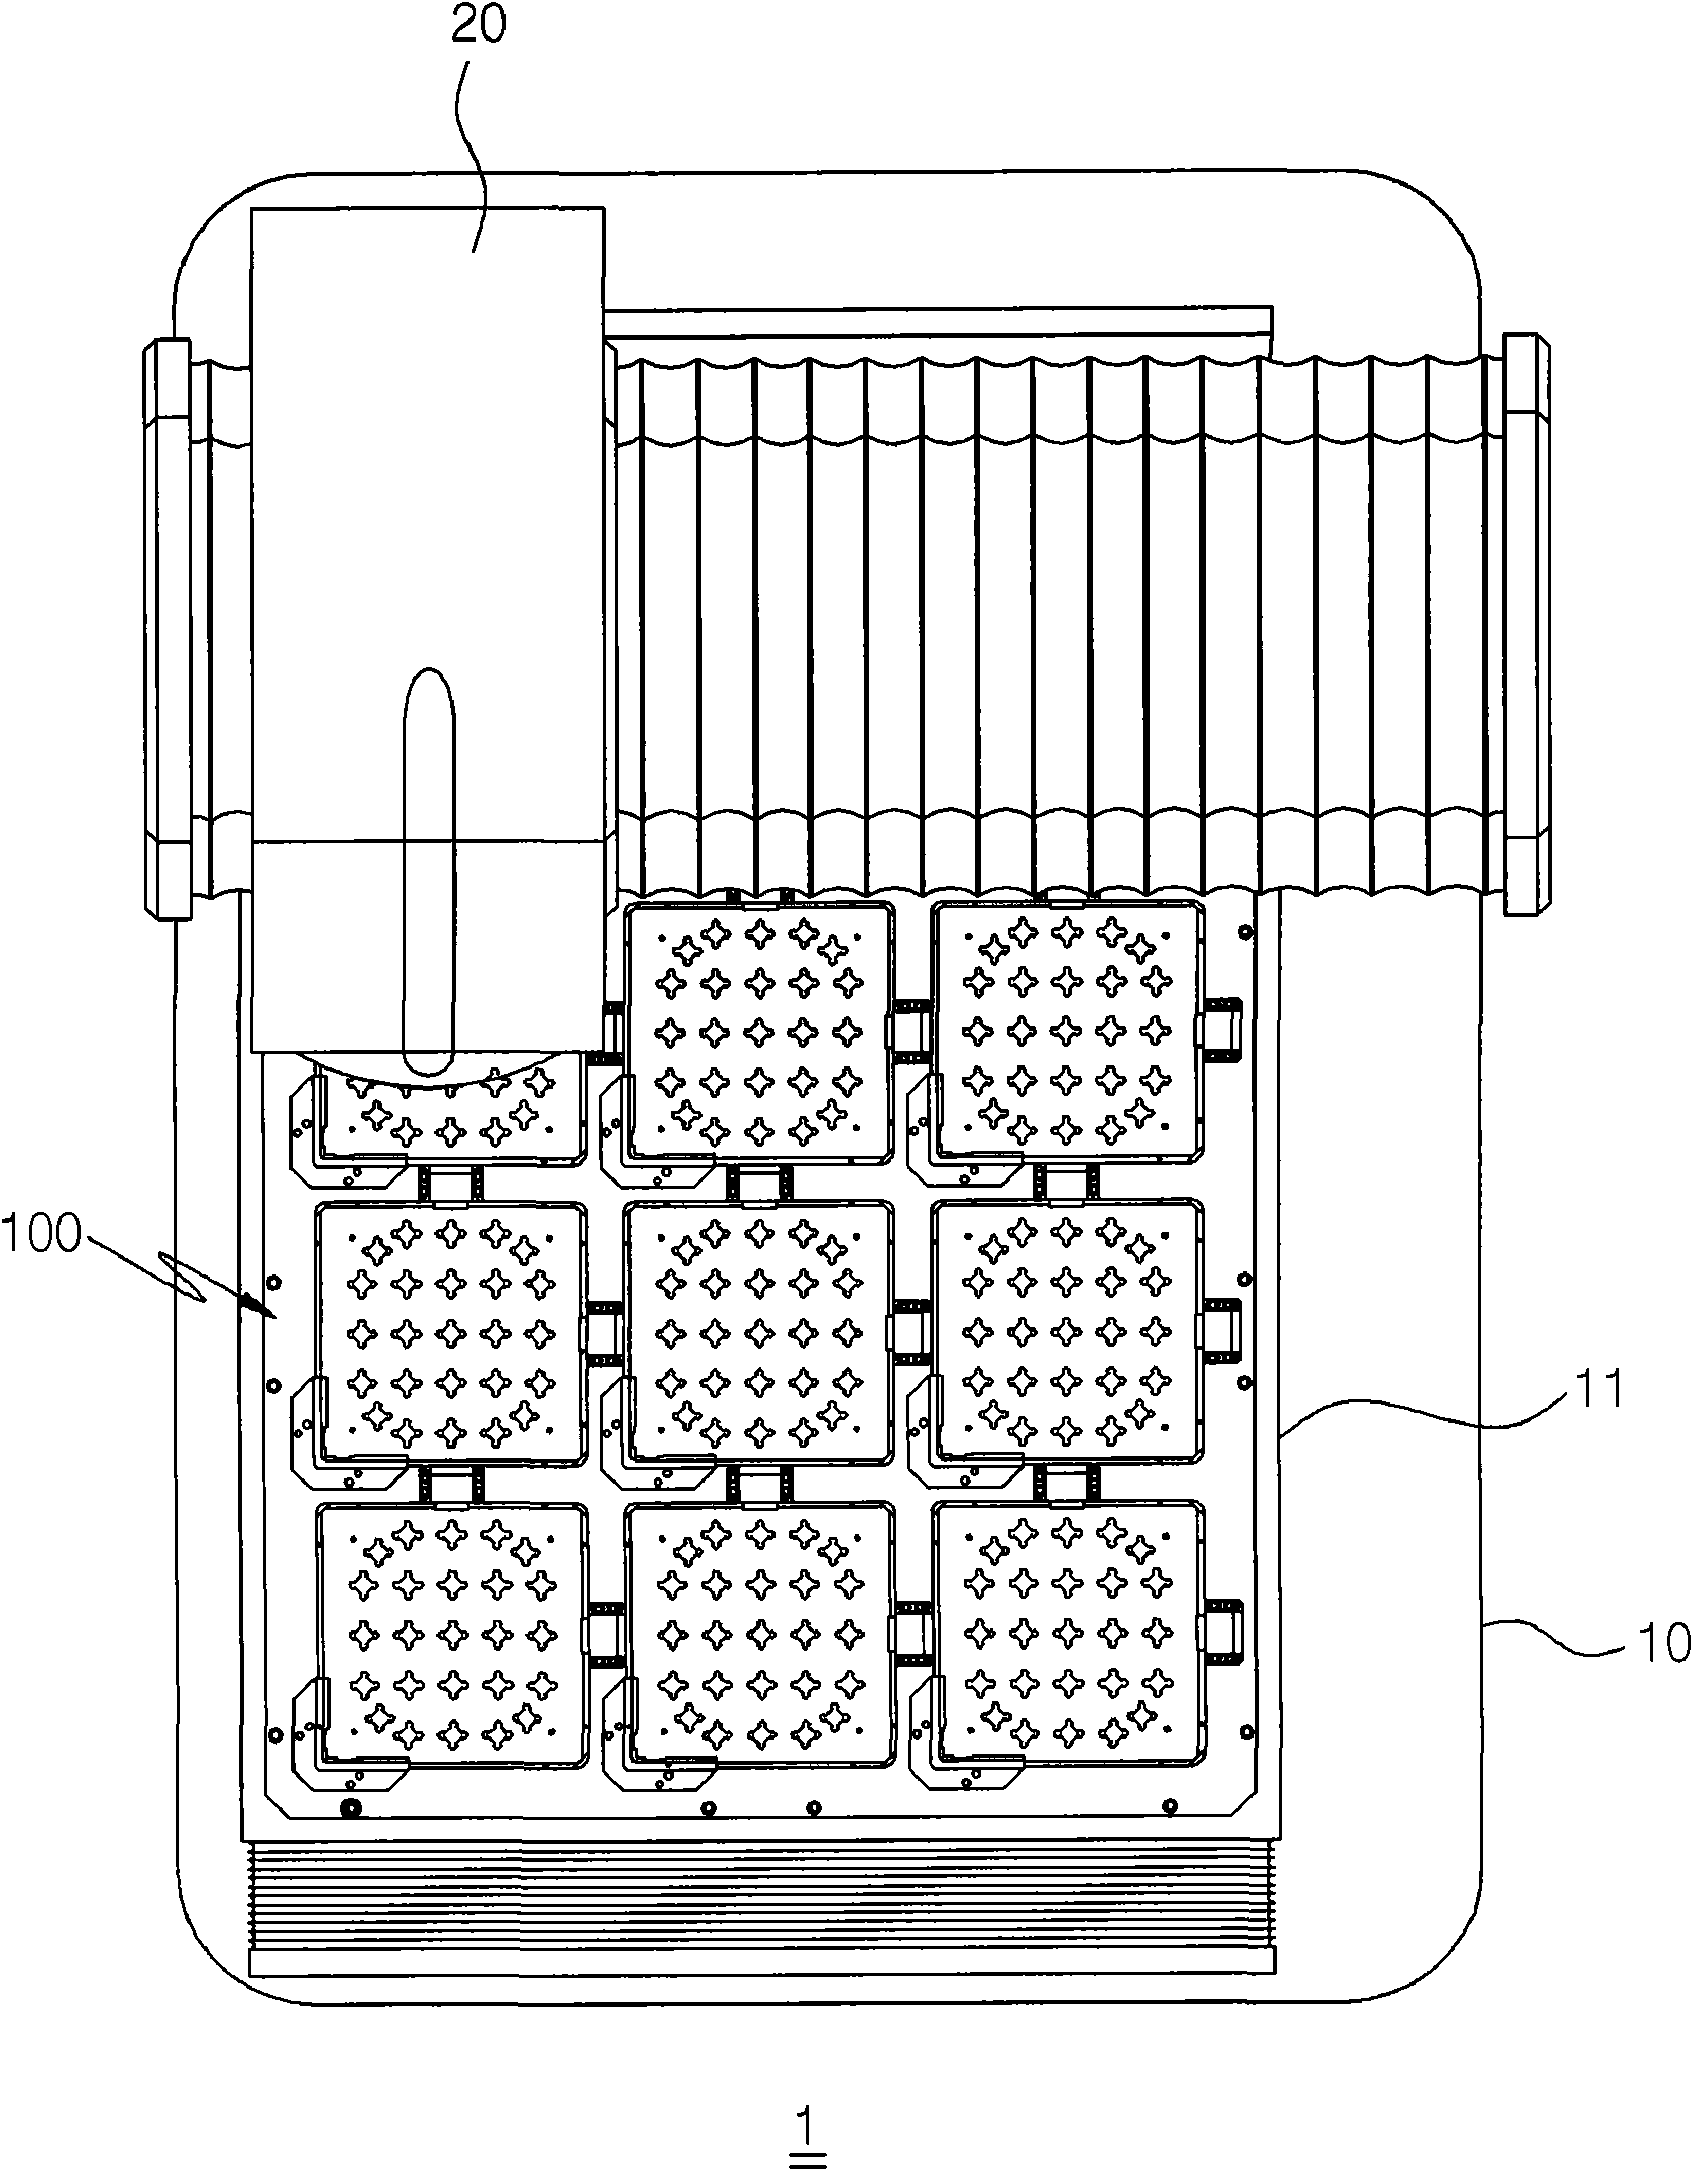 Clamping jig and system for inspecting spacer grids for nuclear fuel assembly